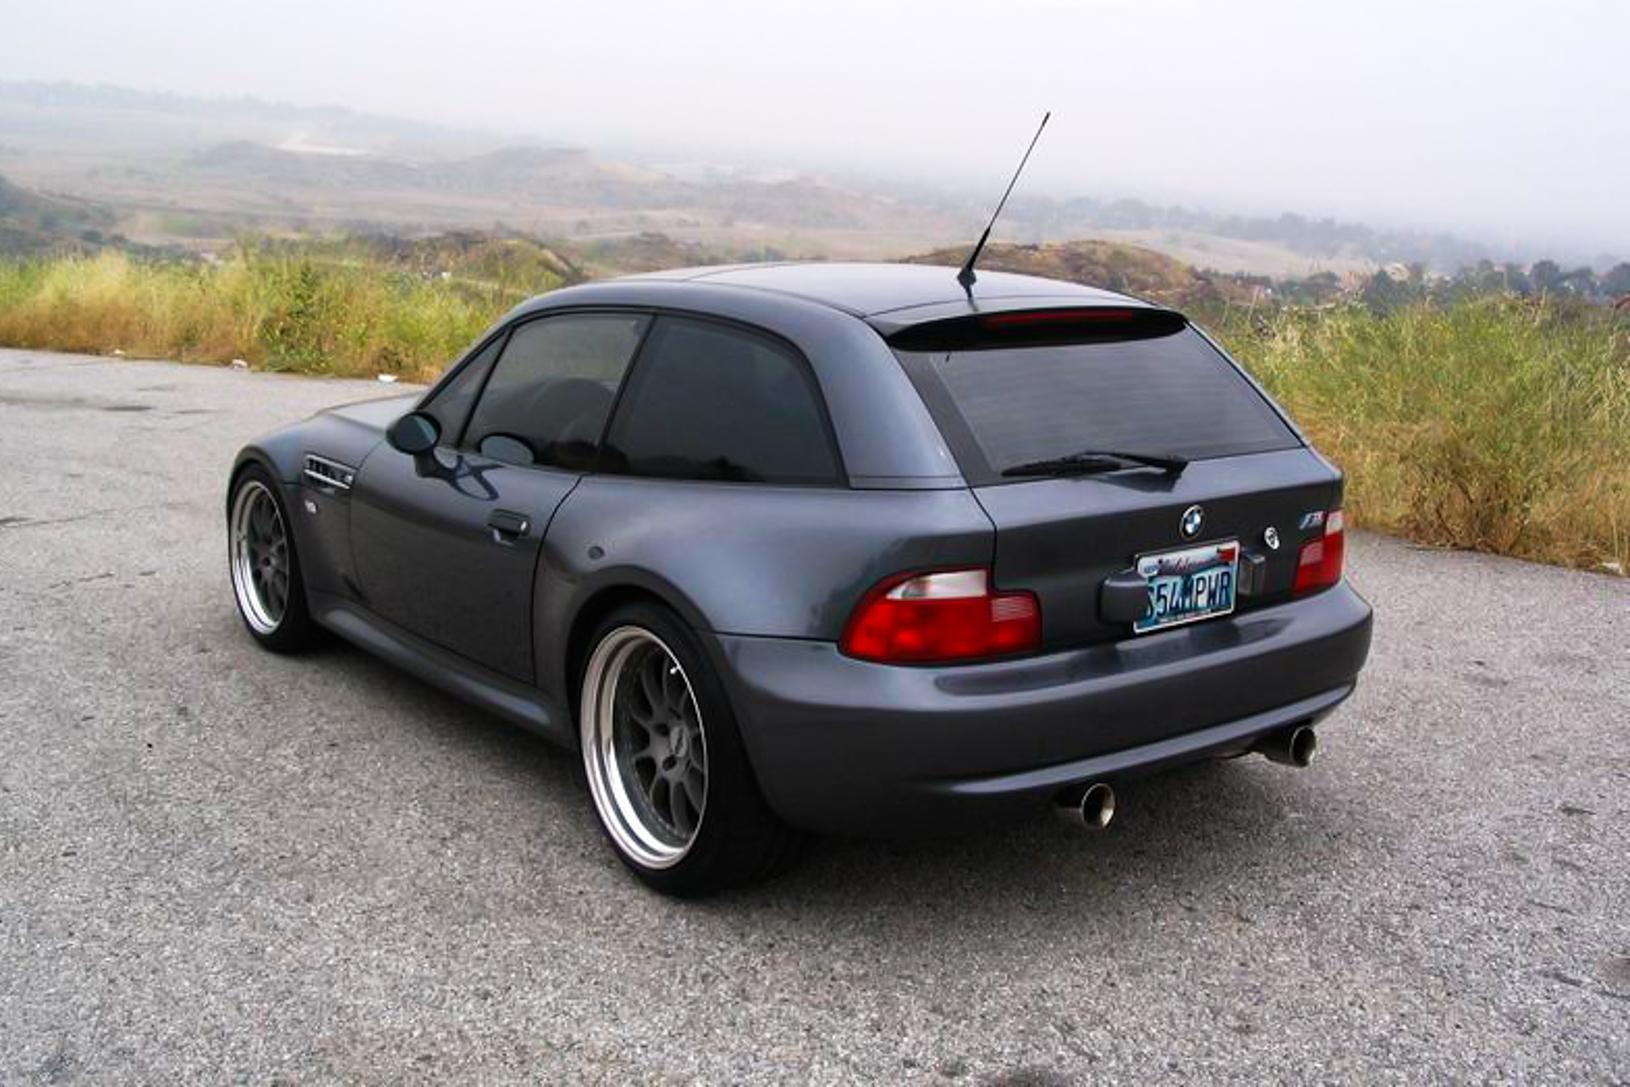 2001 BMW Z3 M Coupe 'Supercharged' | Built for Backroads